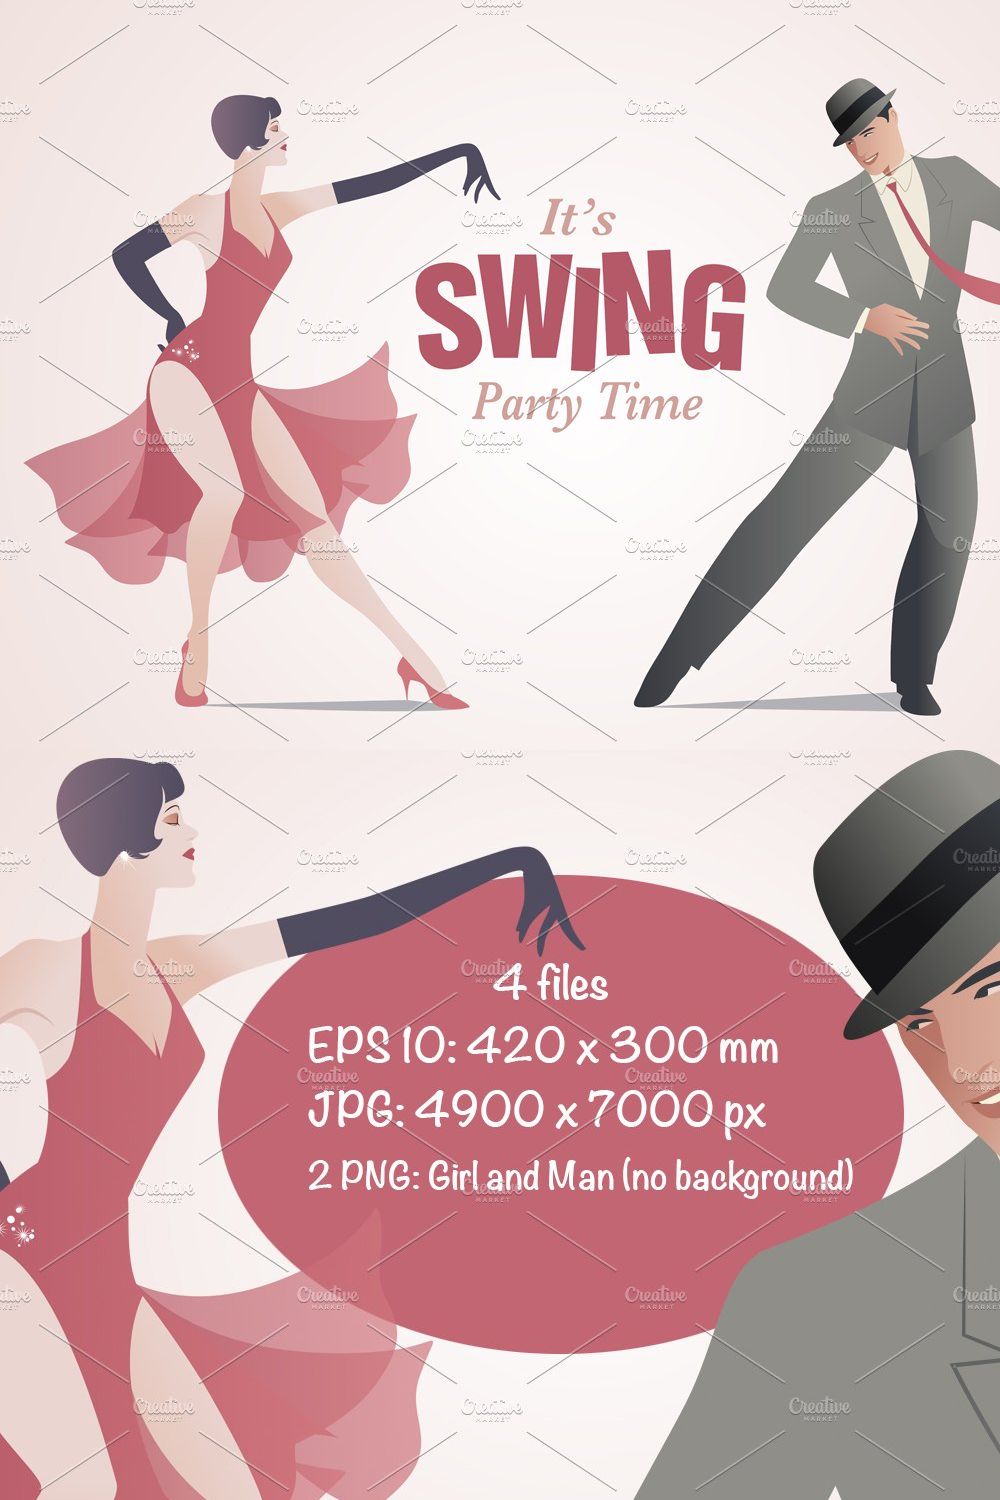 It's Swing Party Time pinterest preview image.